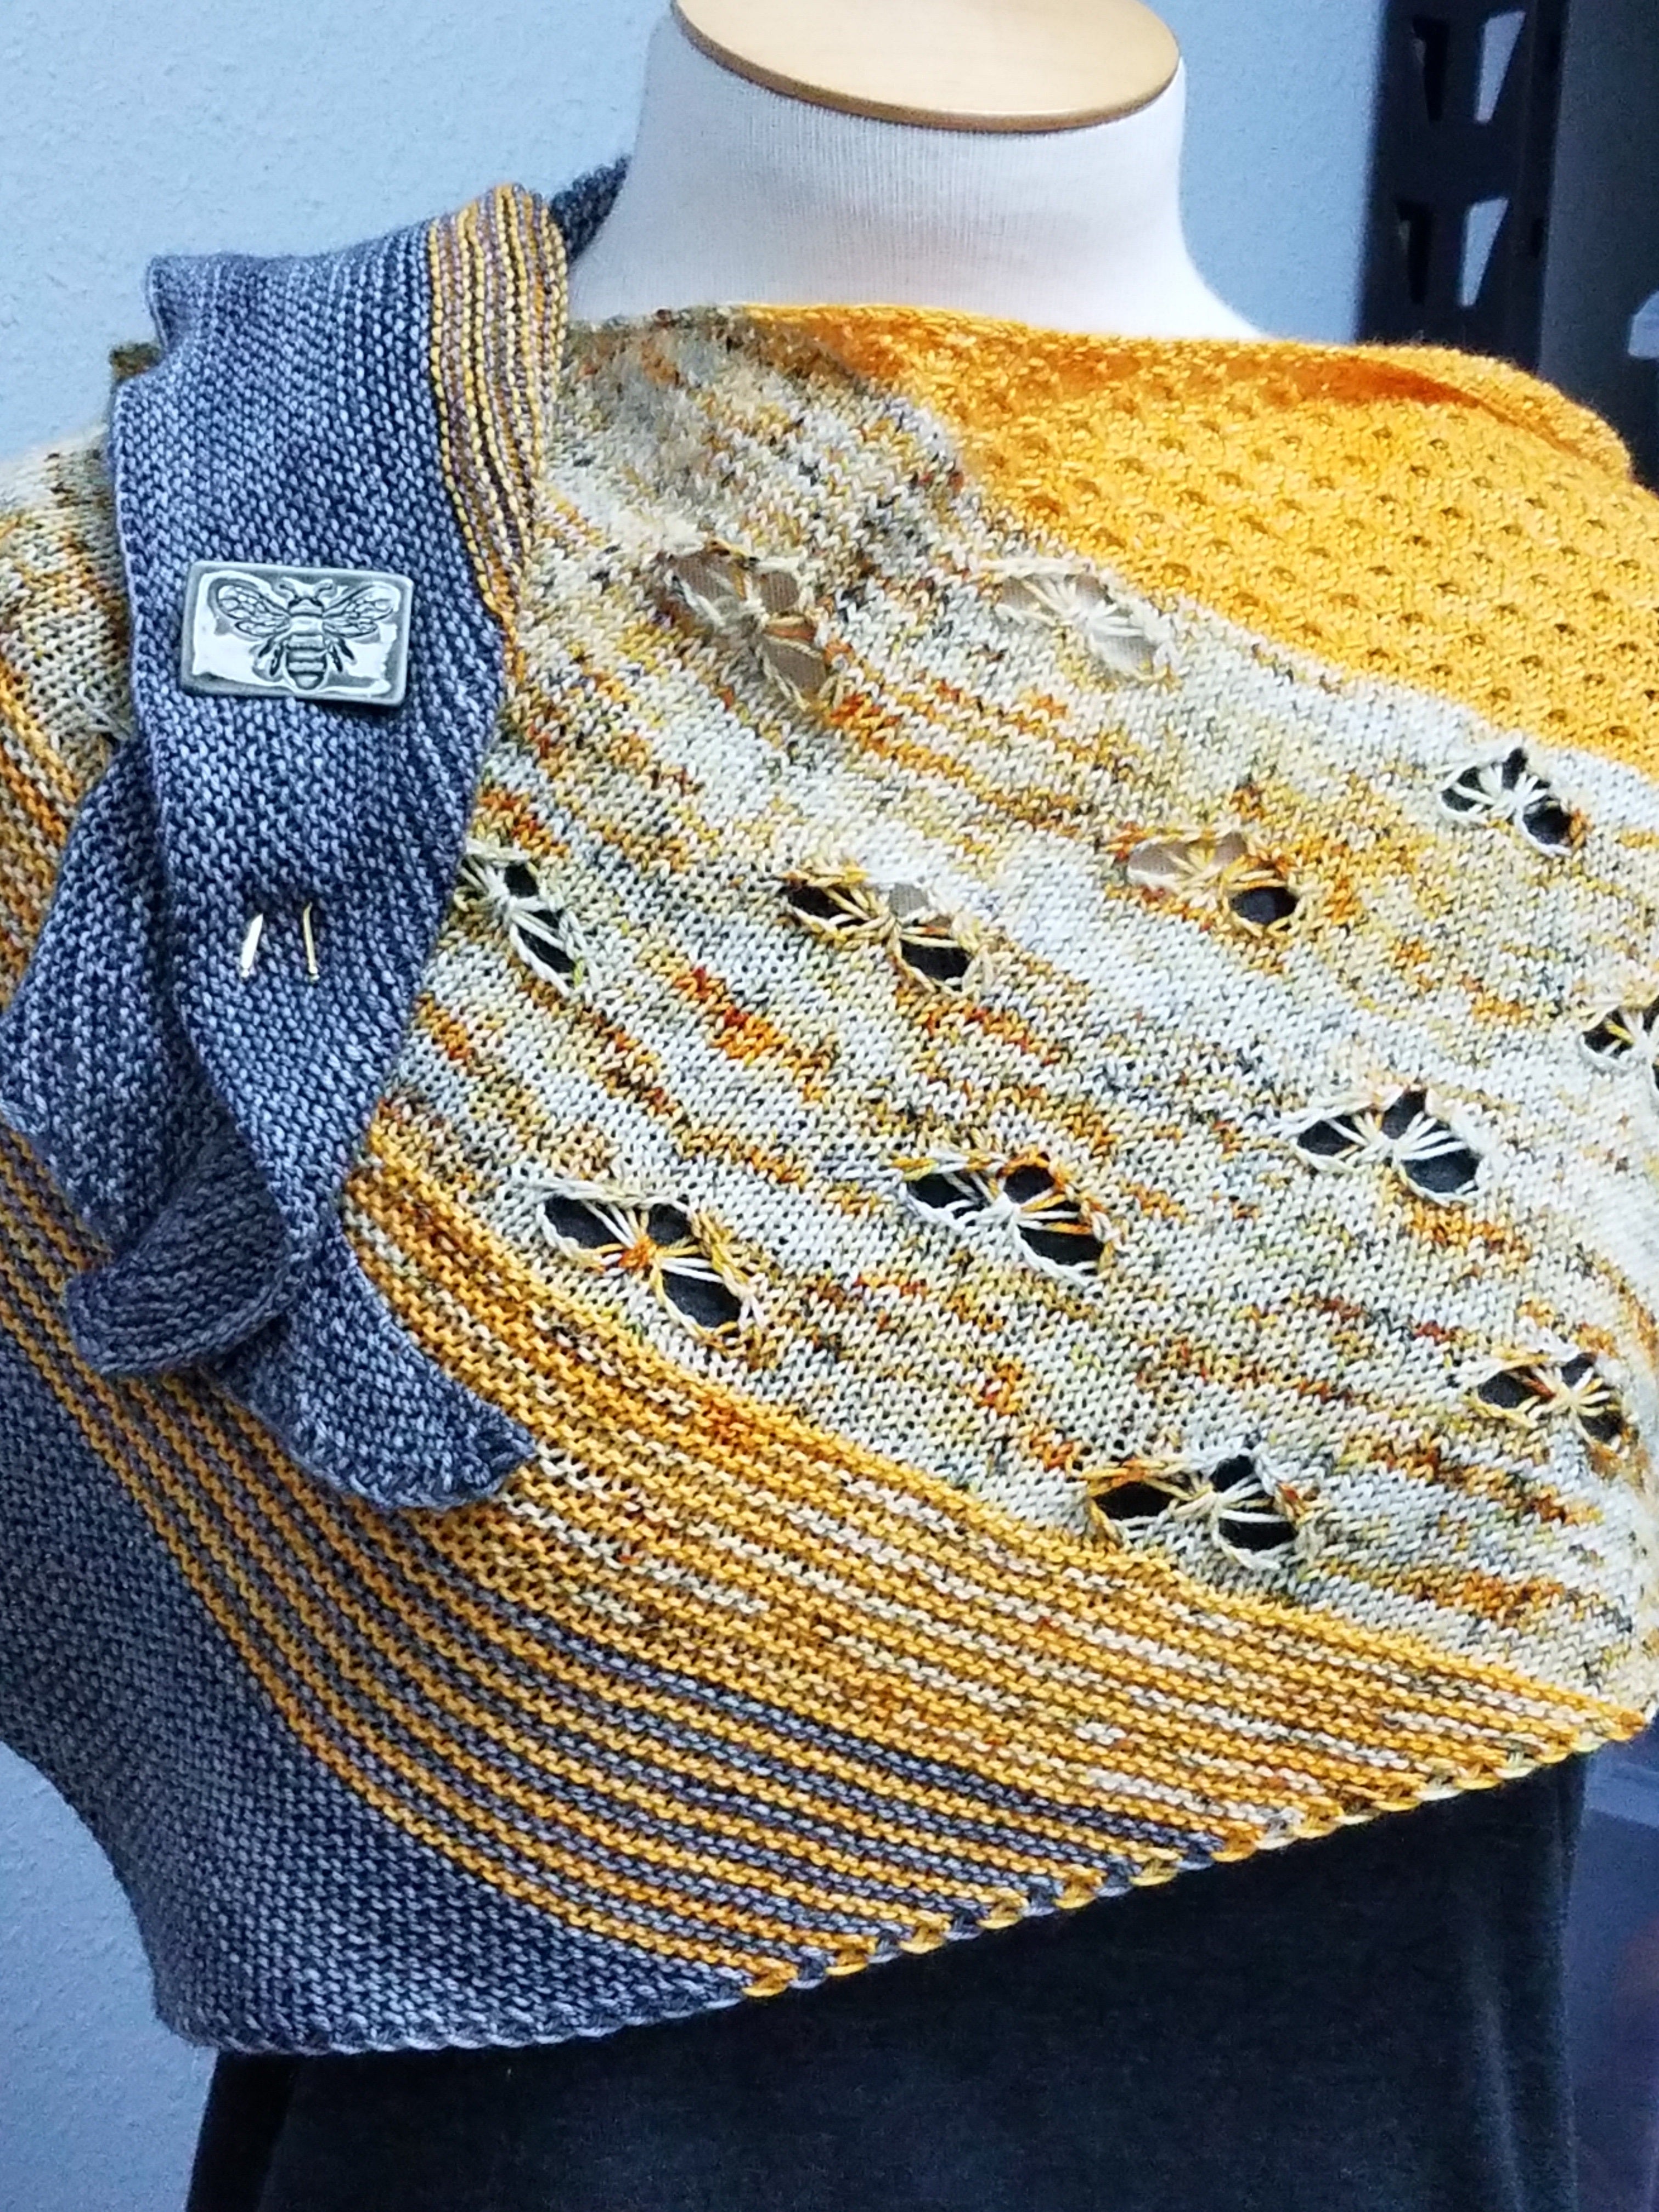 Save The Bees Pattern only